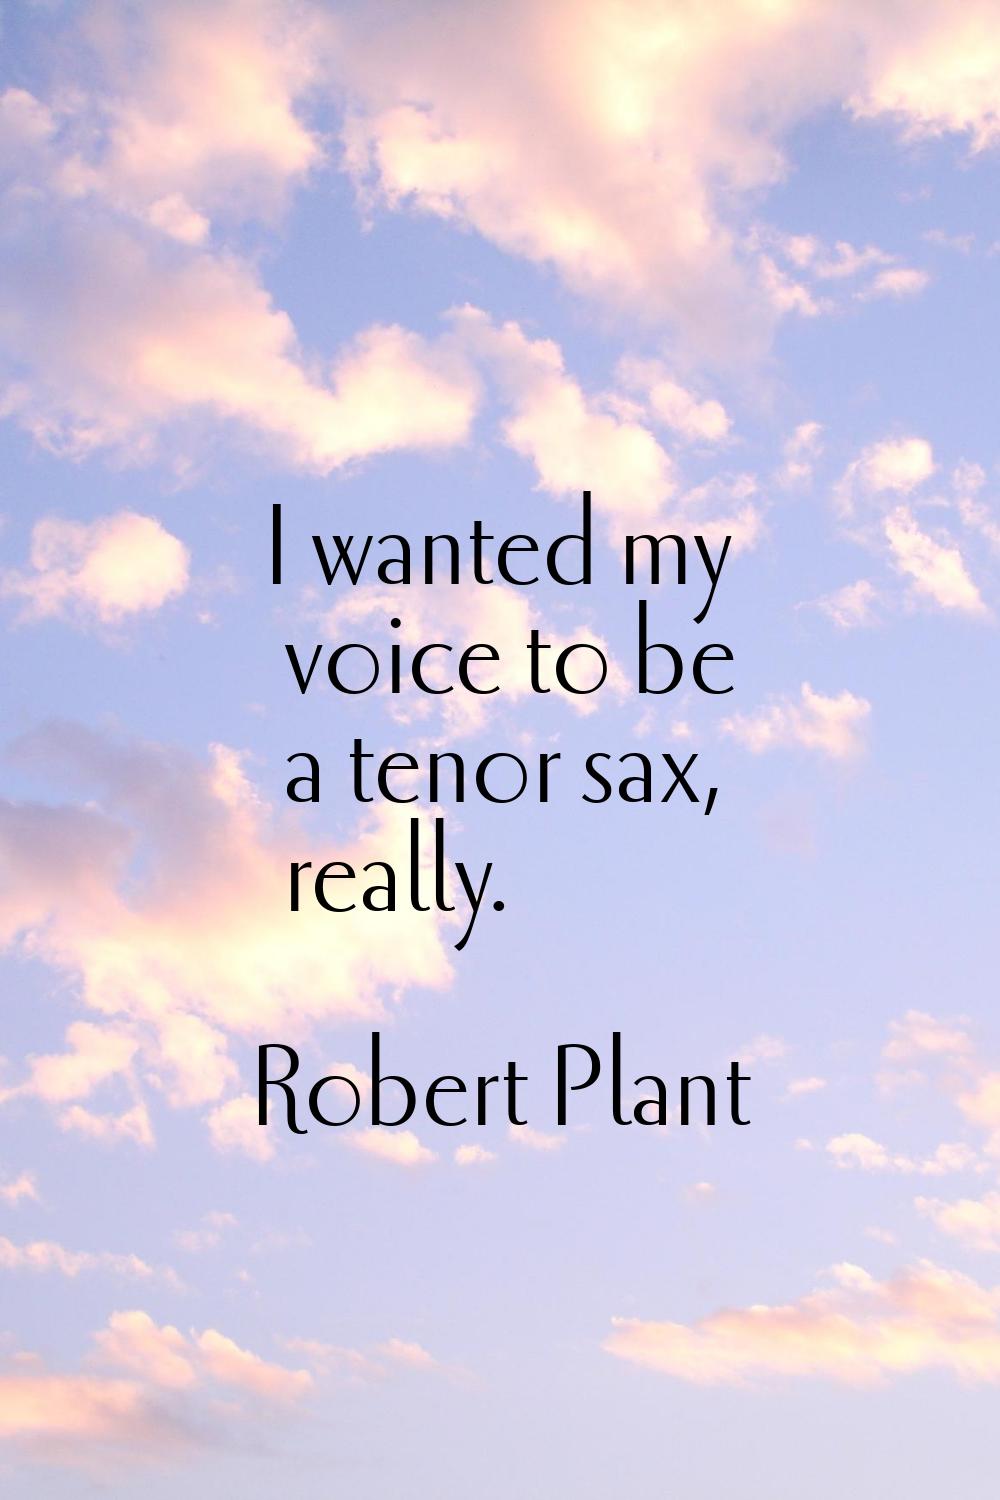 I wanted my voice to be a tenor sax, really.